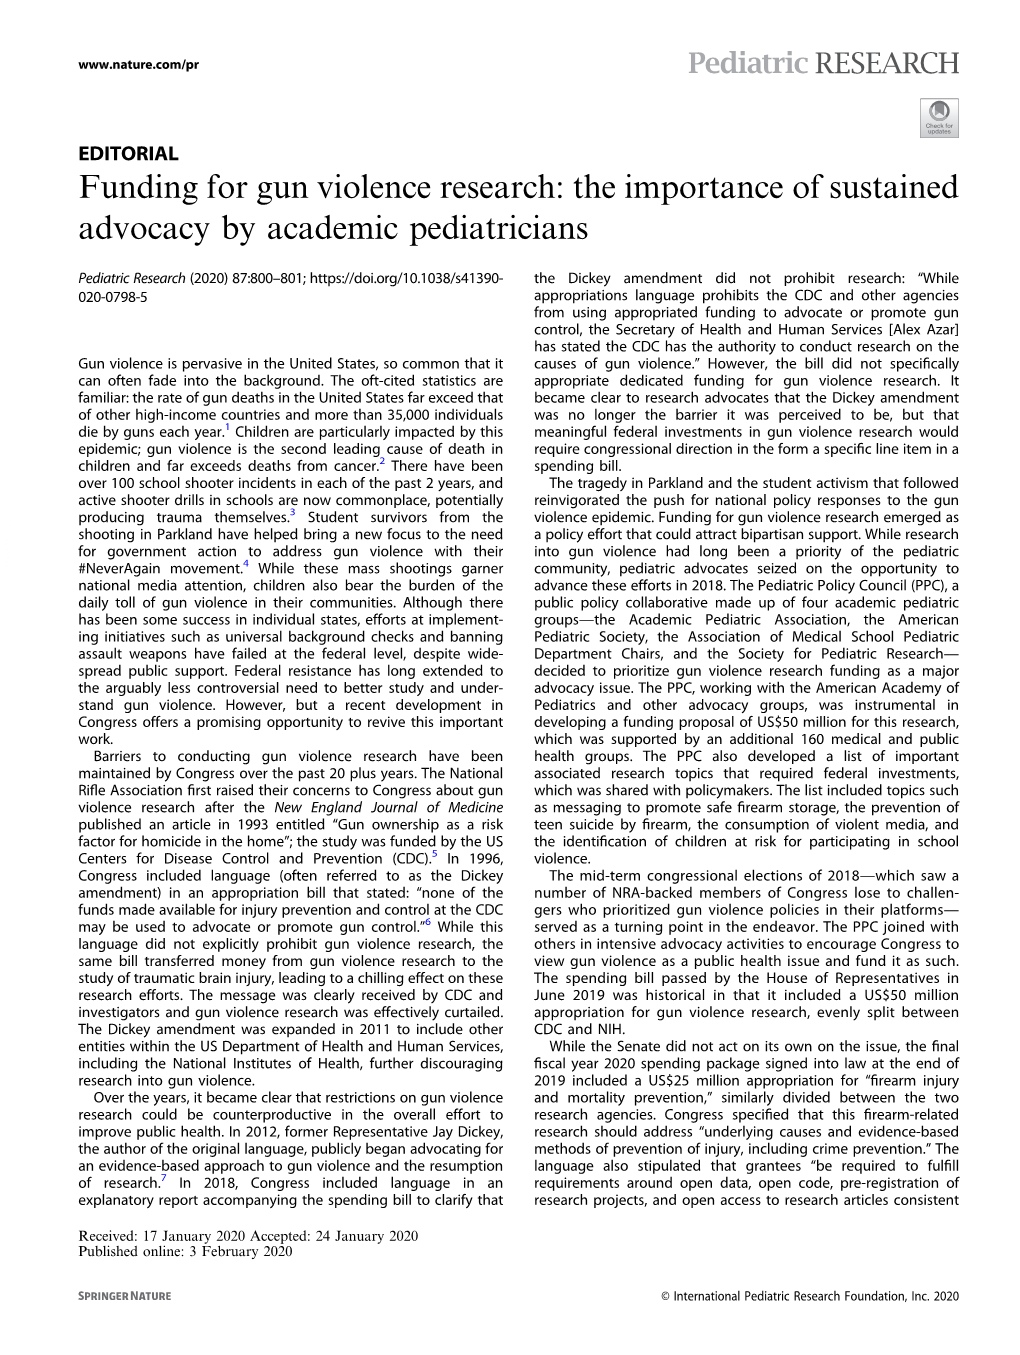 Funding for Gun Violence Research: the Importance of Sustained Advocacy by Academic Pediatricians